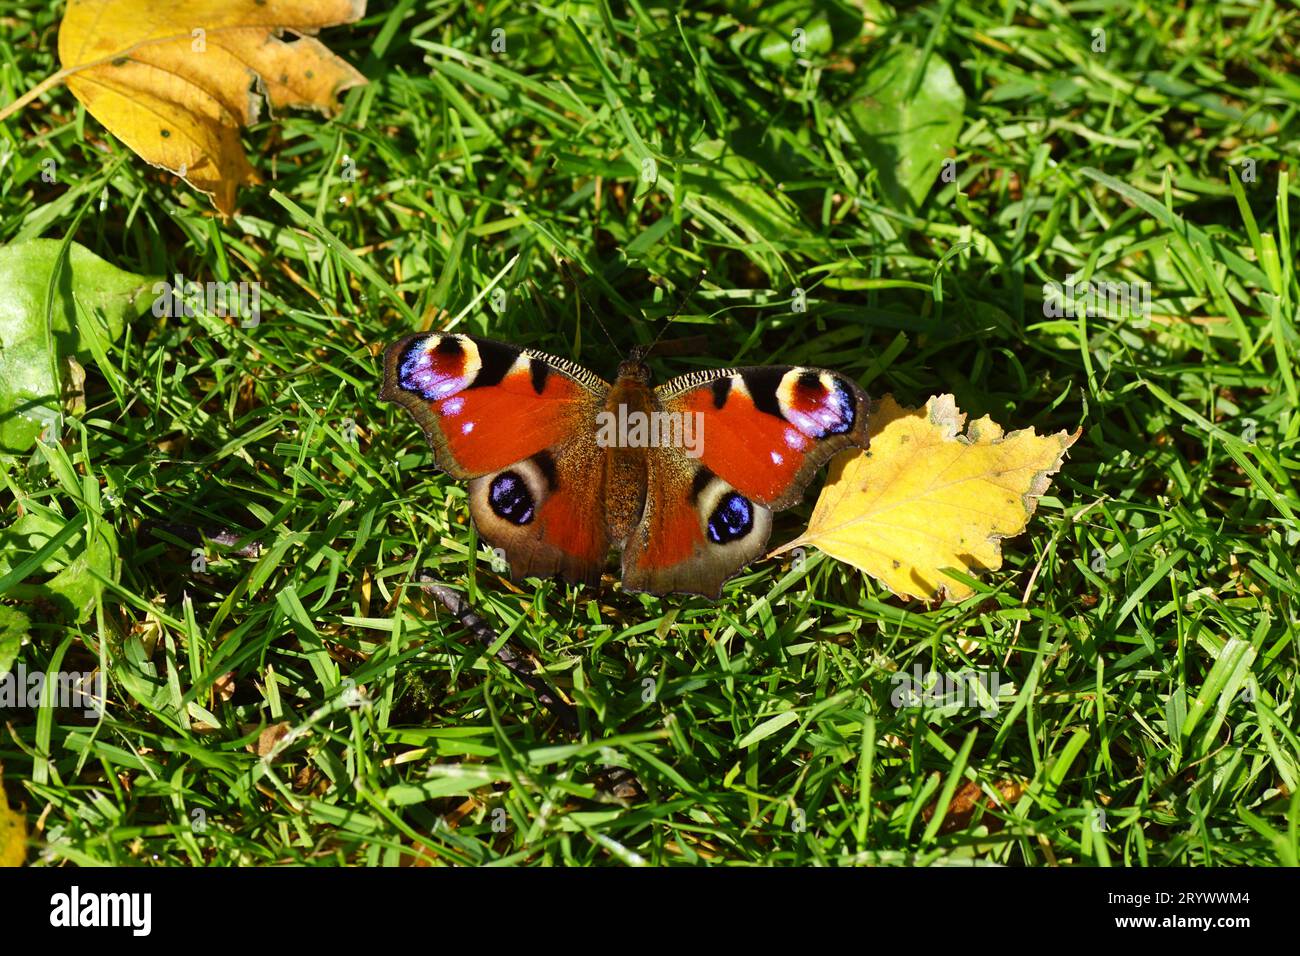 Peacock butterfly (Aglais io, Inachis io), family Nymphalidae in the sun on the grass of the lawn with autumn birch leaves. Netherlands, October Stock Photo